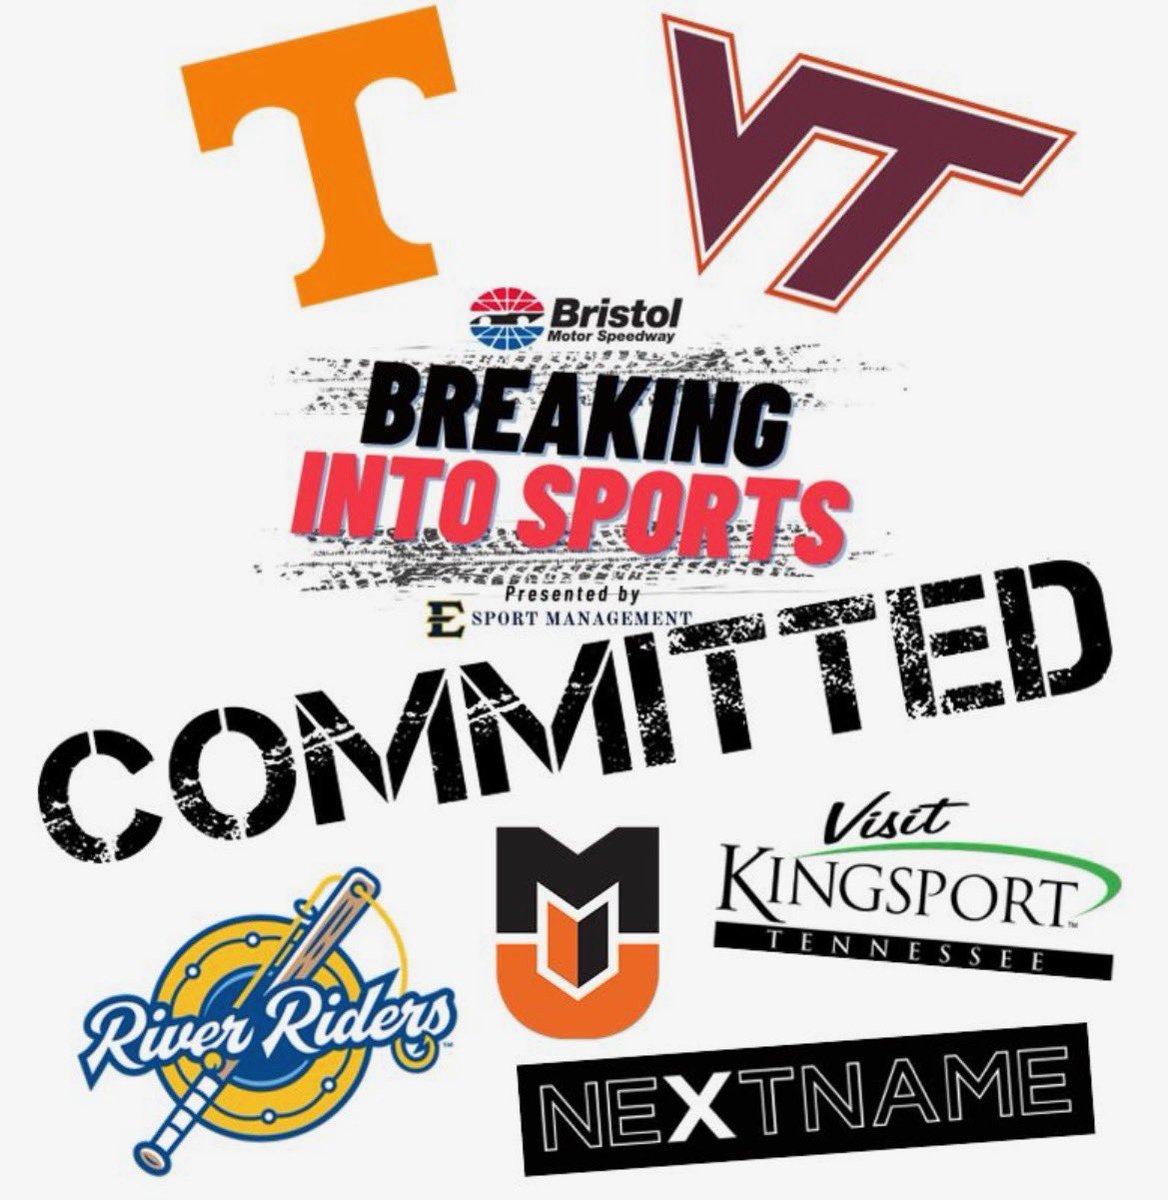 Staffers from Virginia Tech Athletics & University of Tennessee, Knoxville will be on-hand at #BreakingIntoSports as well #ElizabethtonRiverRiders, Milligan University Athletics, Kingsport Chamber/#VisitKingsport Sport Marketing, NextName at Bristol Motor Speedway and Dragway! https://t.co/DiLdJ4Bnvp